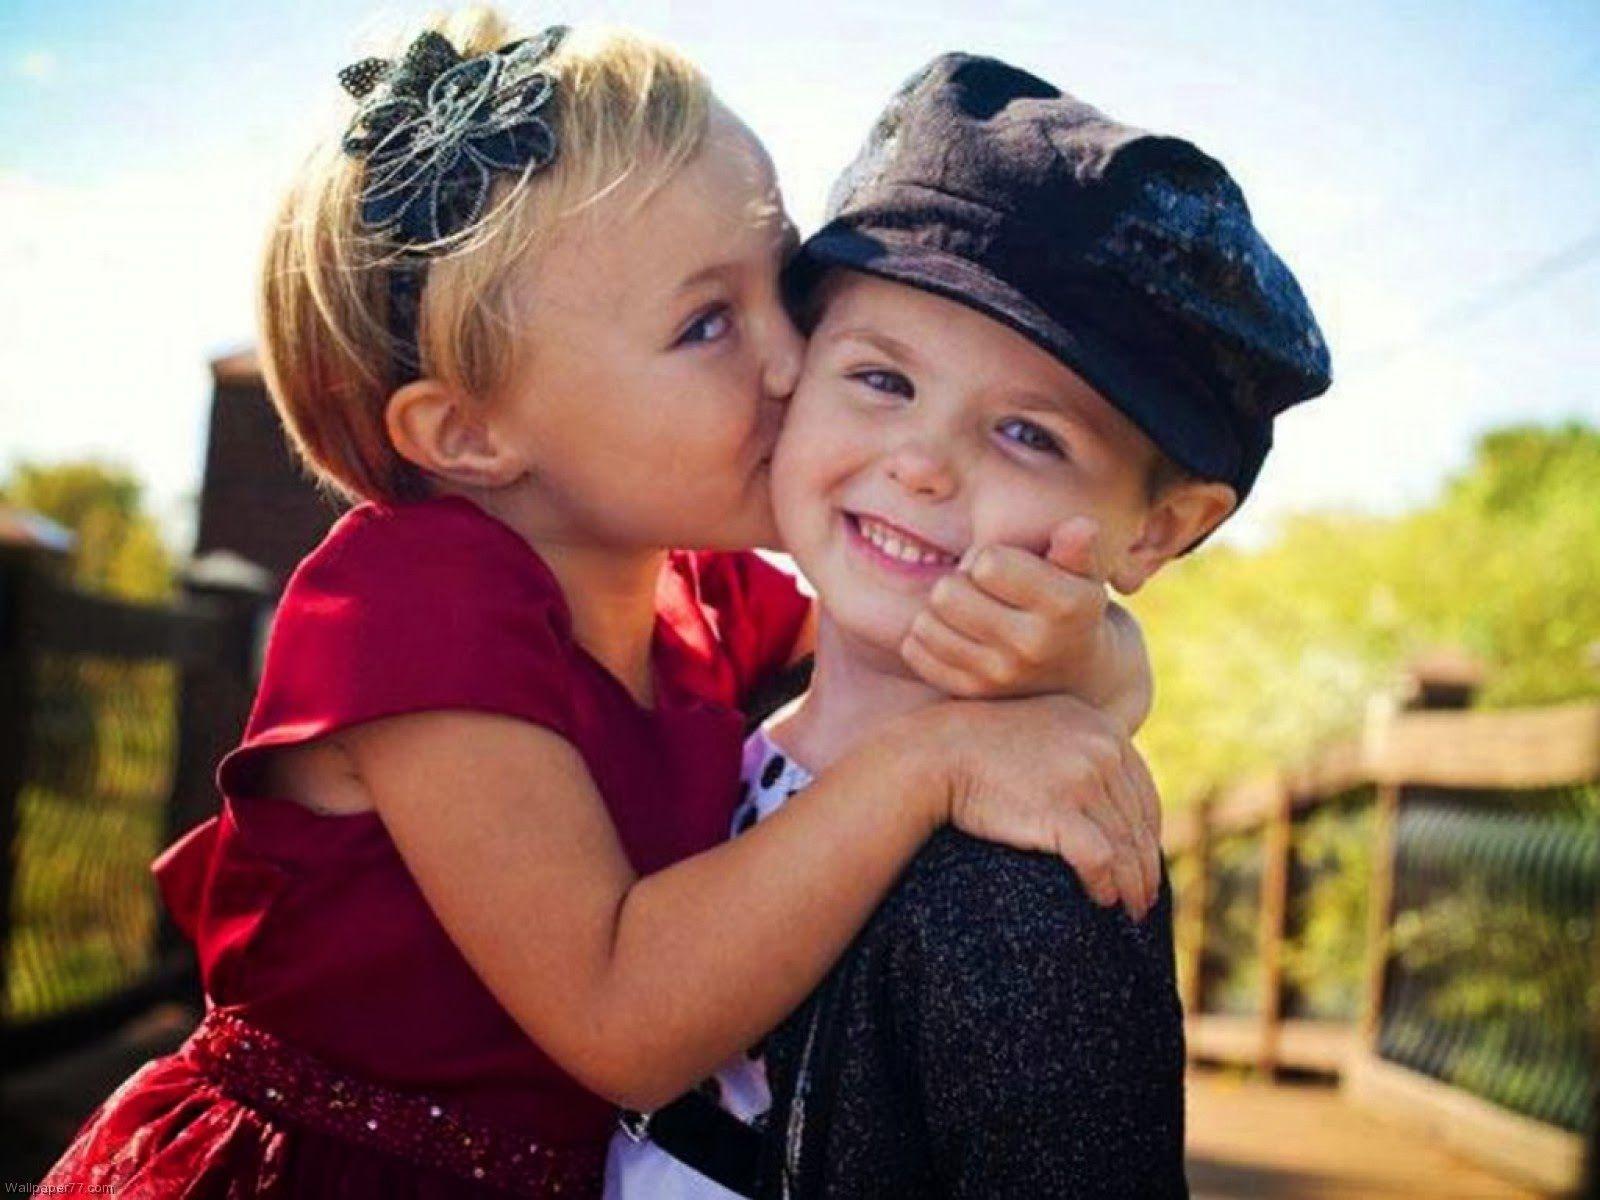 Full HD Cute baby kiss image download Wallpaper, Android. Free